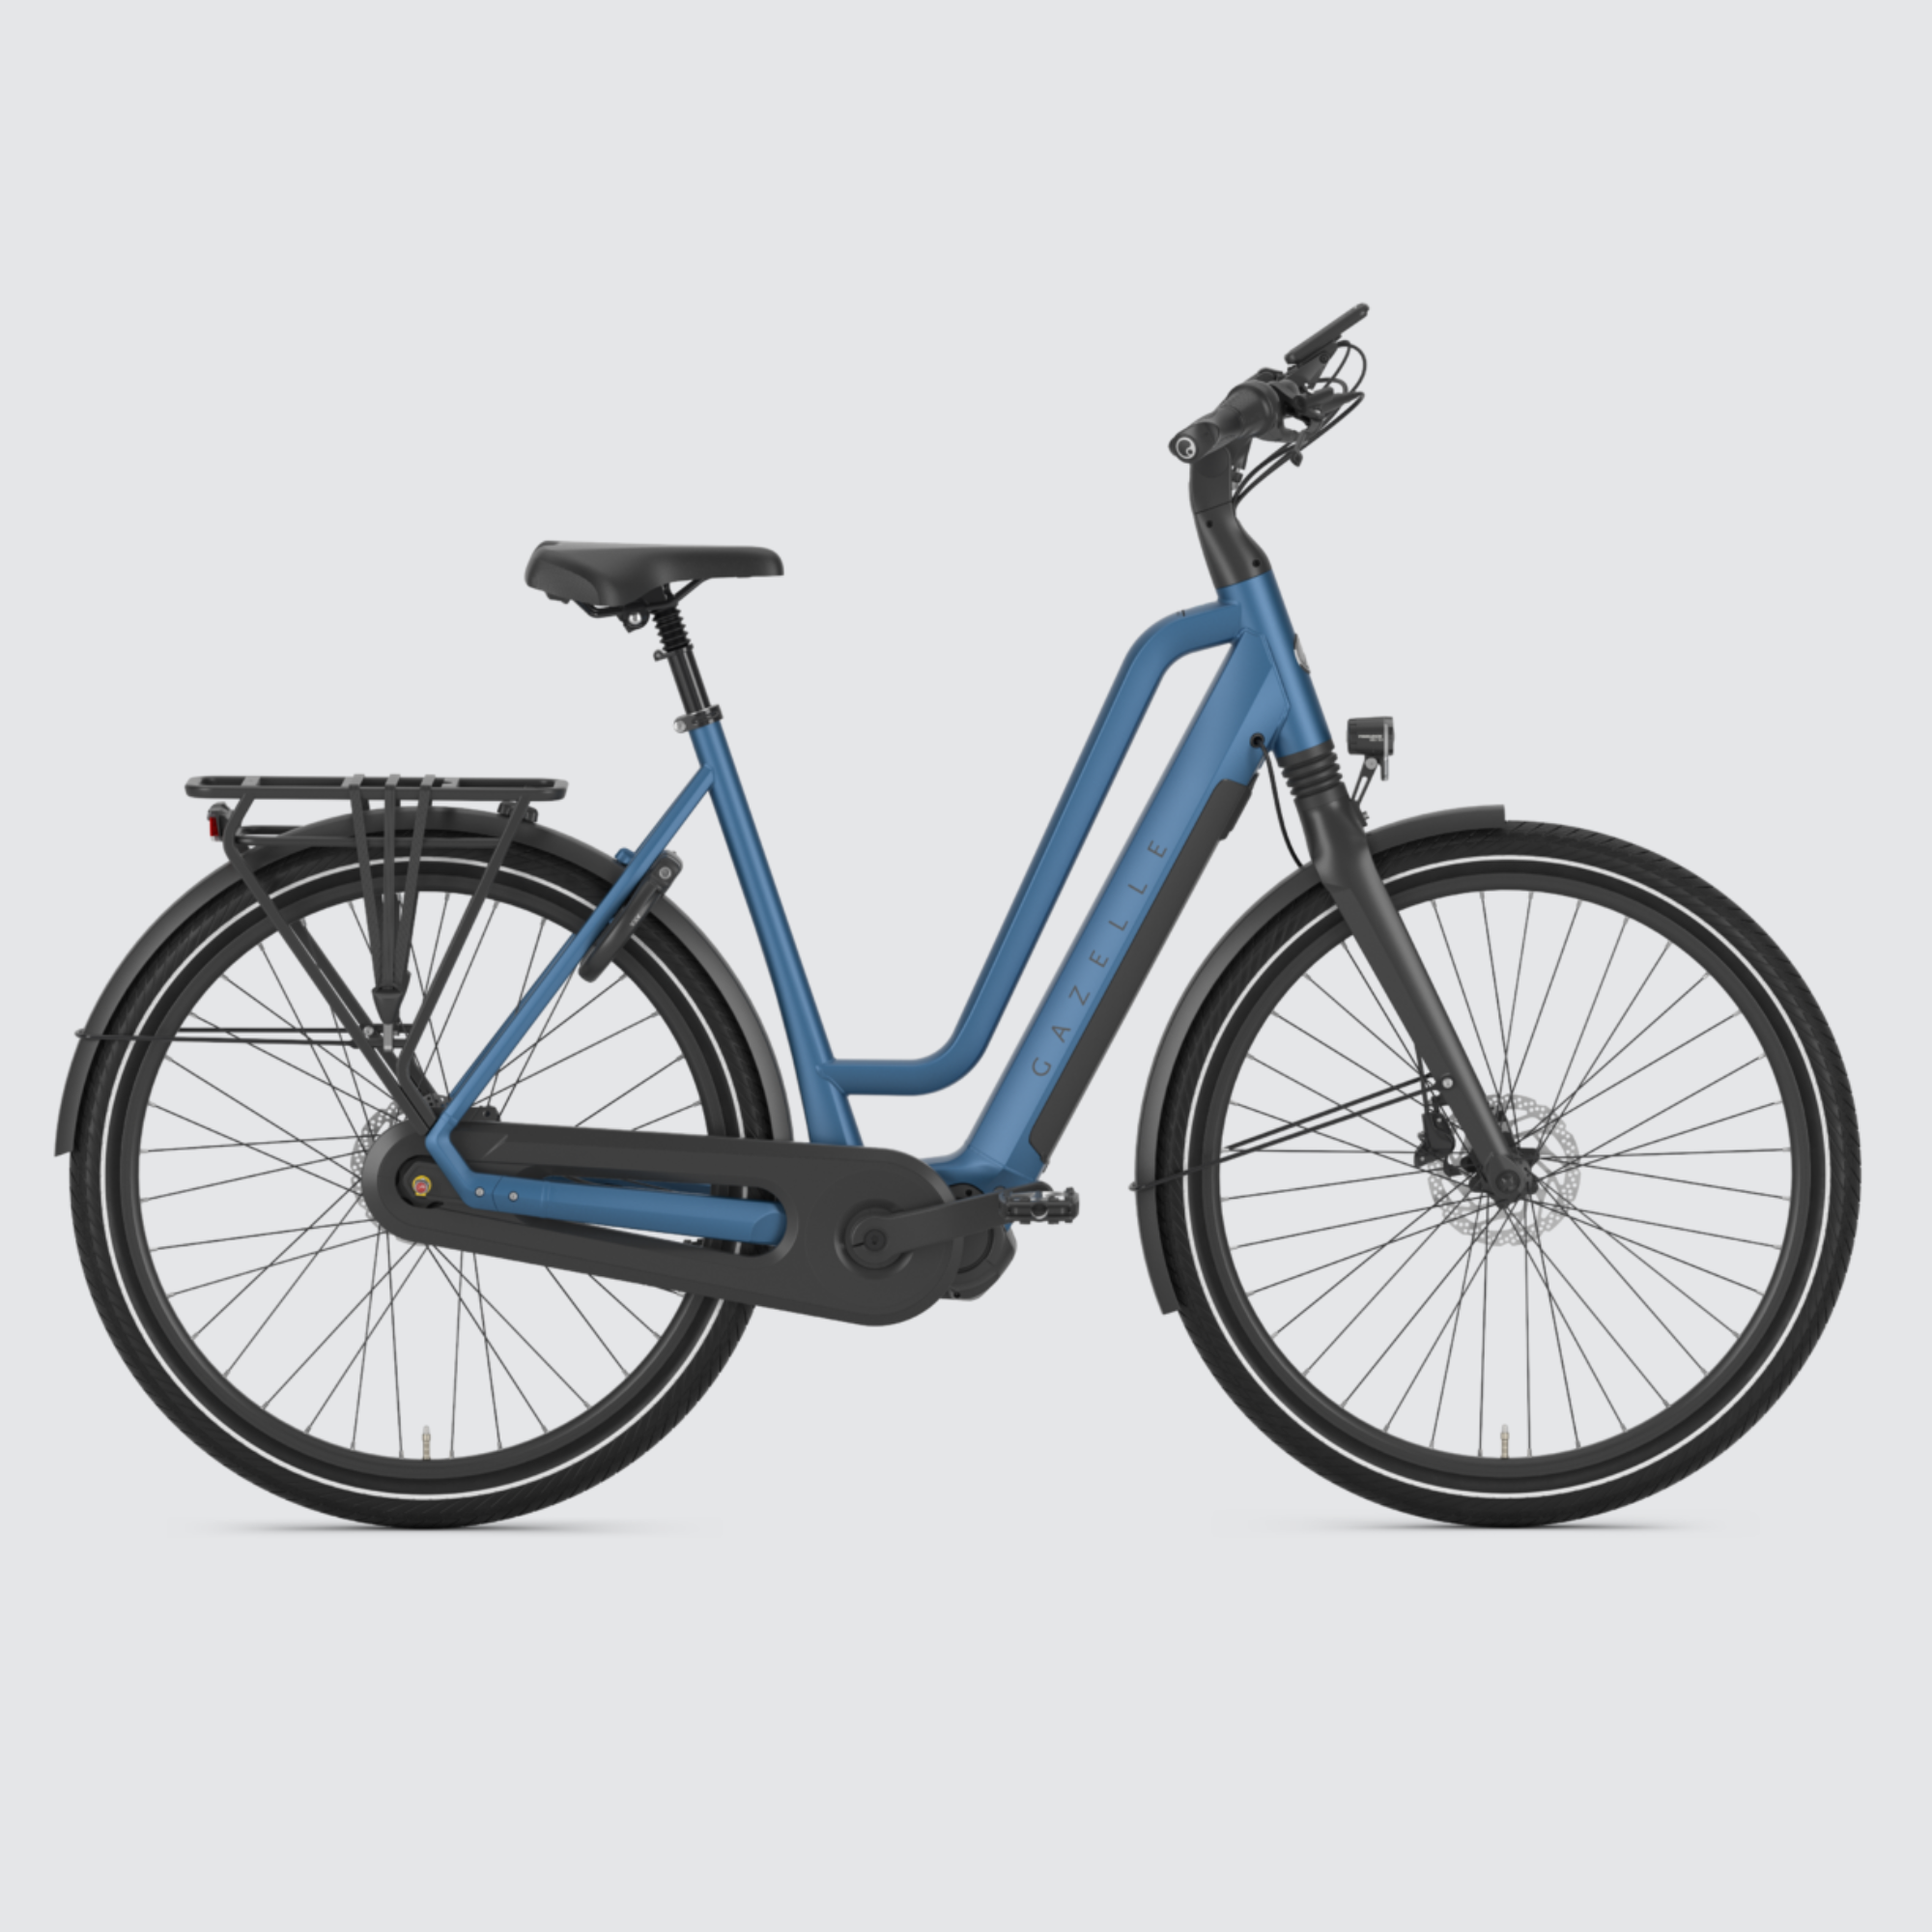 Gazelle Chamonix C7 HMS Electric Bike with low-step frame in spark blue- The perfect blend of power and versatility for your cycling adventures.